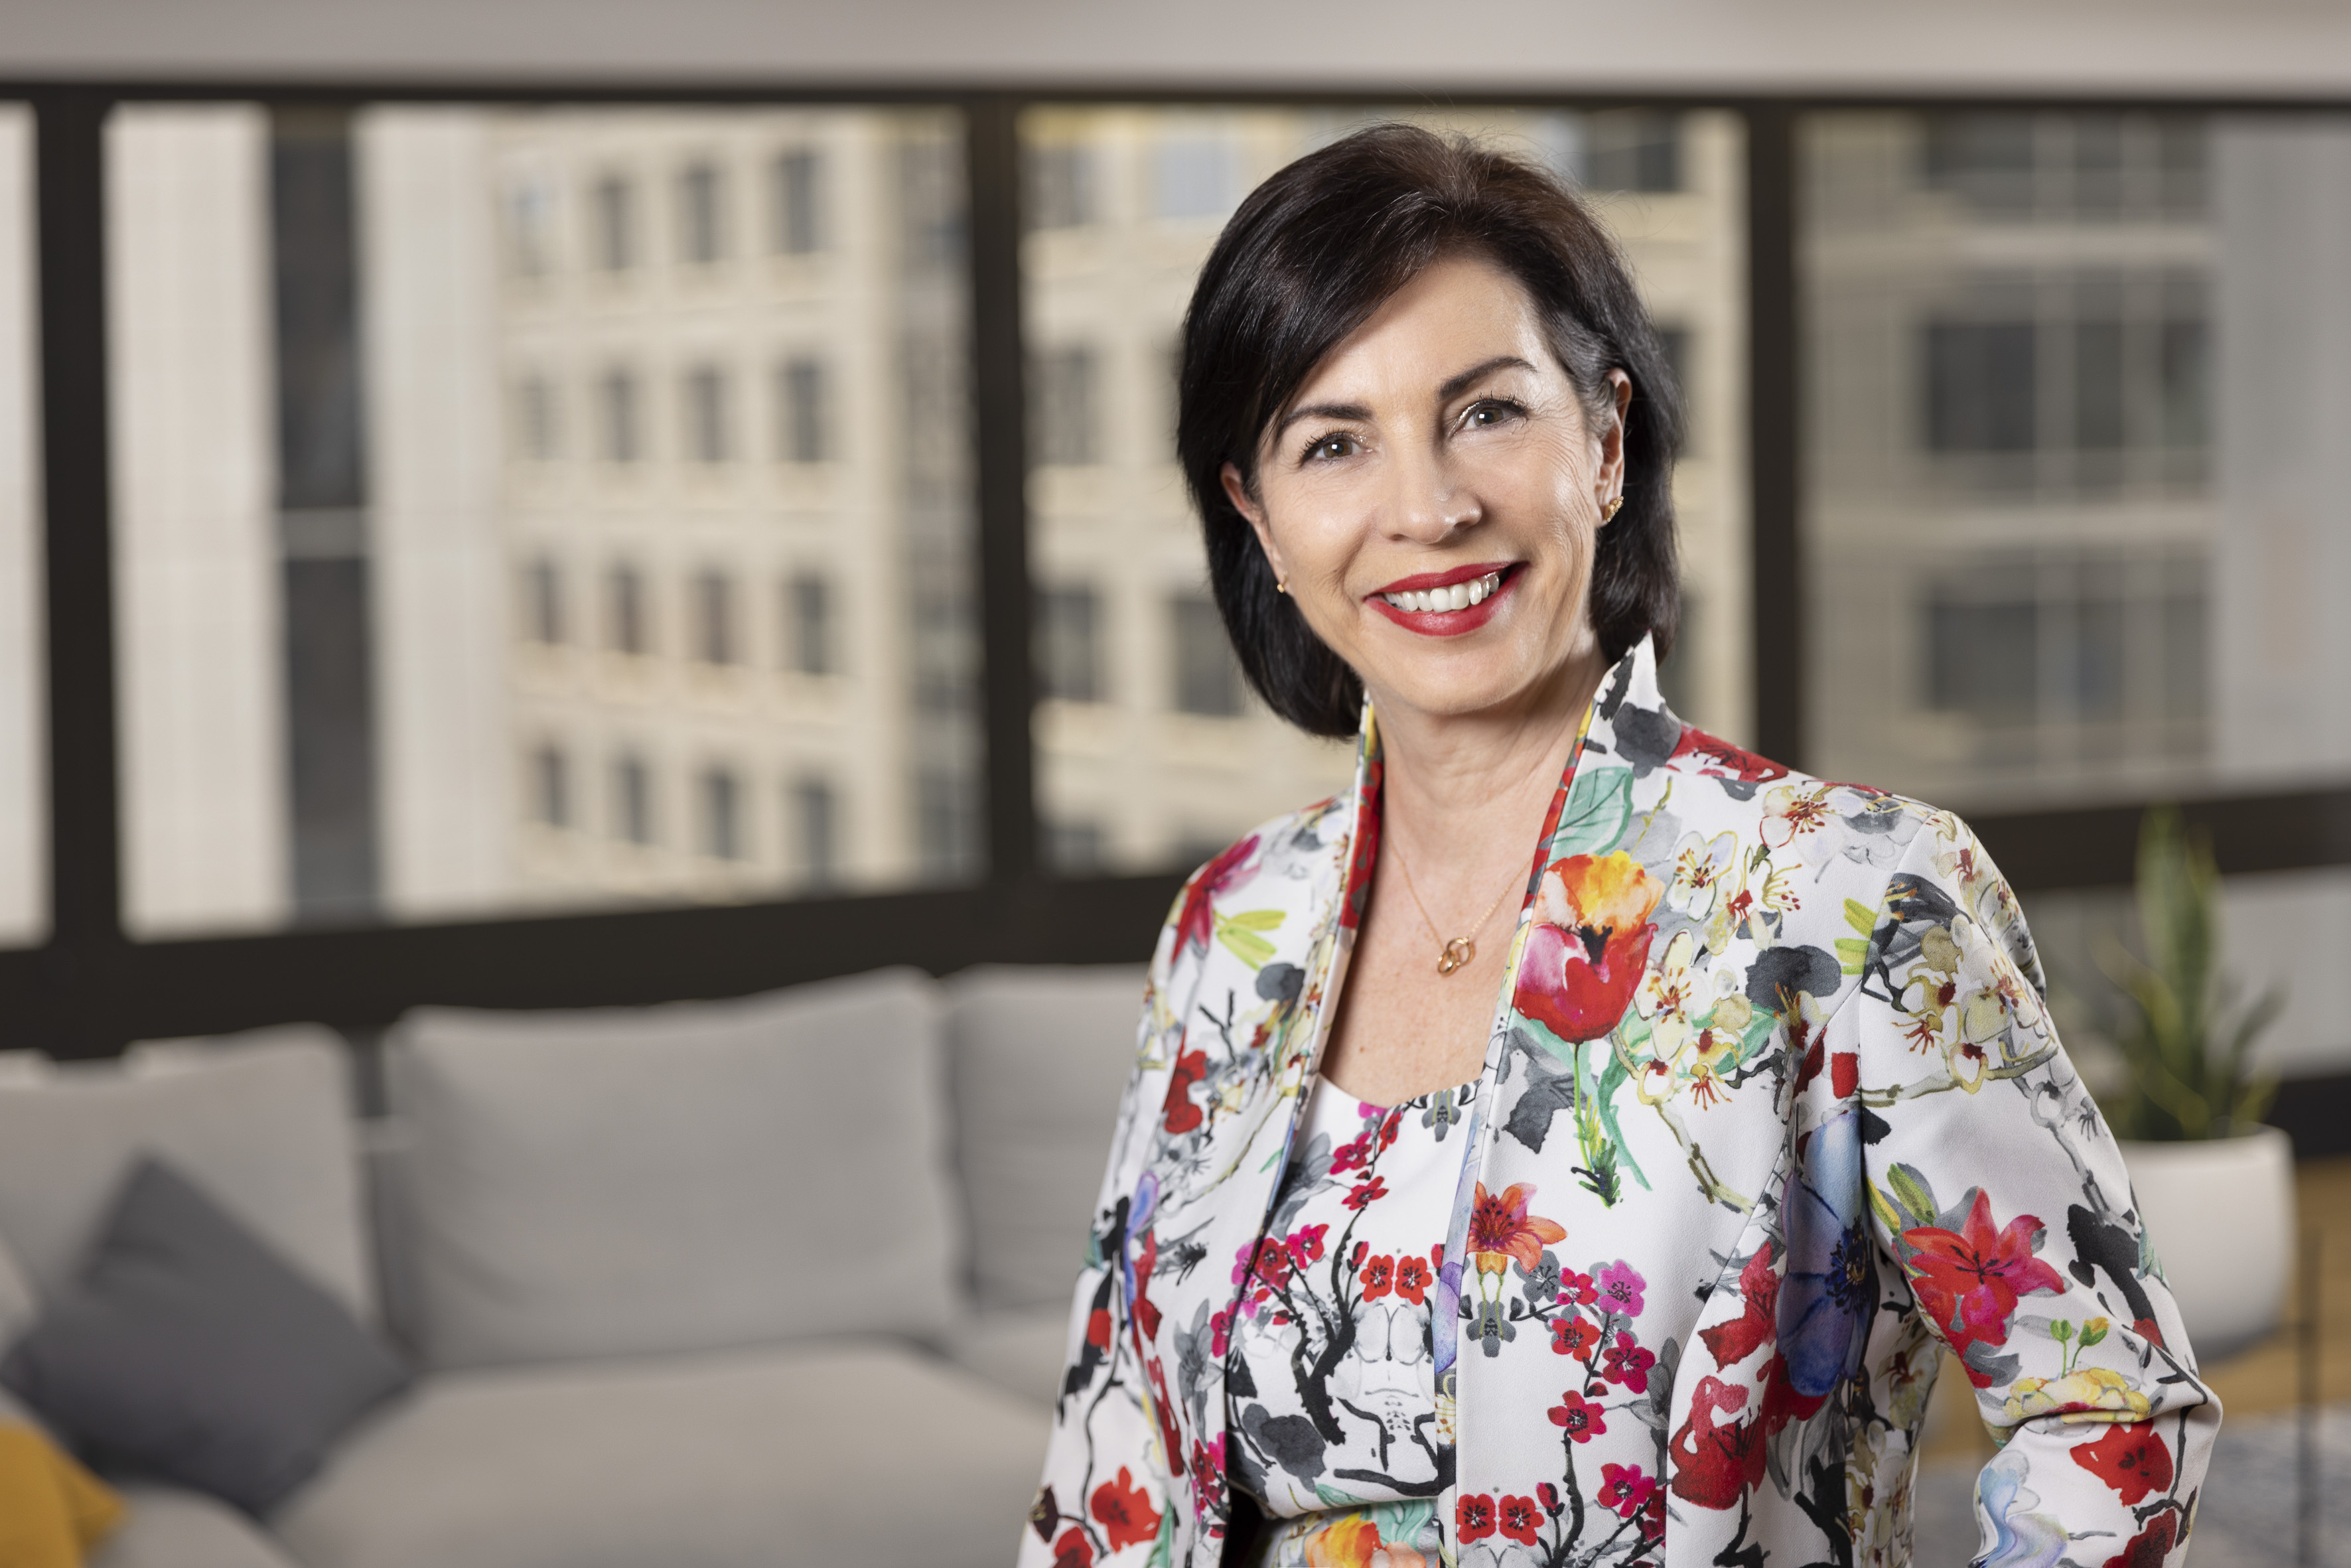 Real estate Institute of Australia welcomes first all-female executive team with a new president at the helm